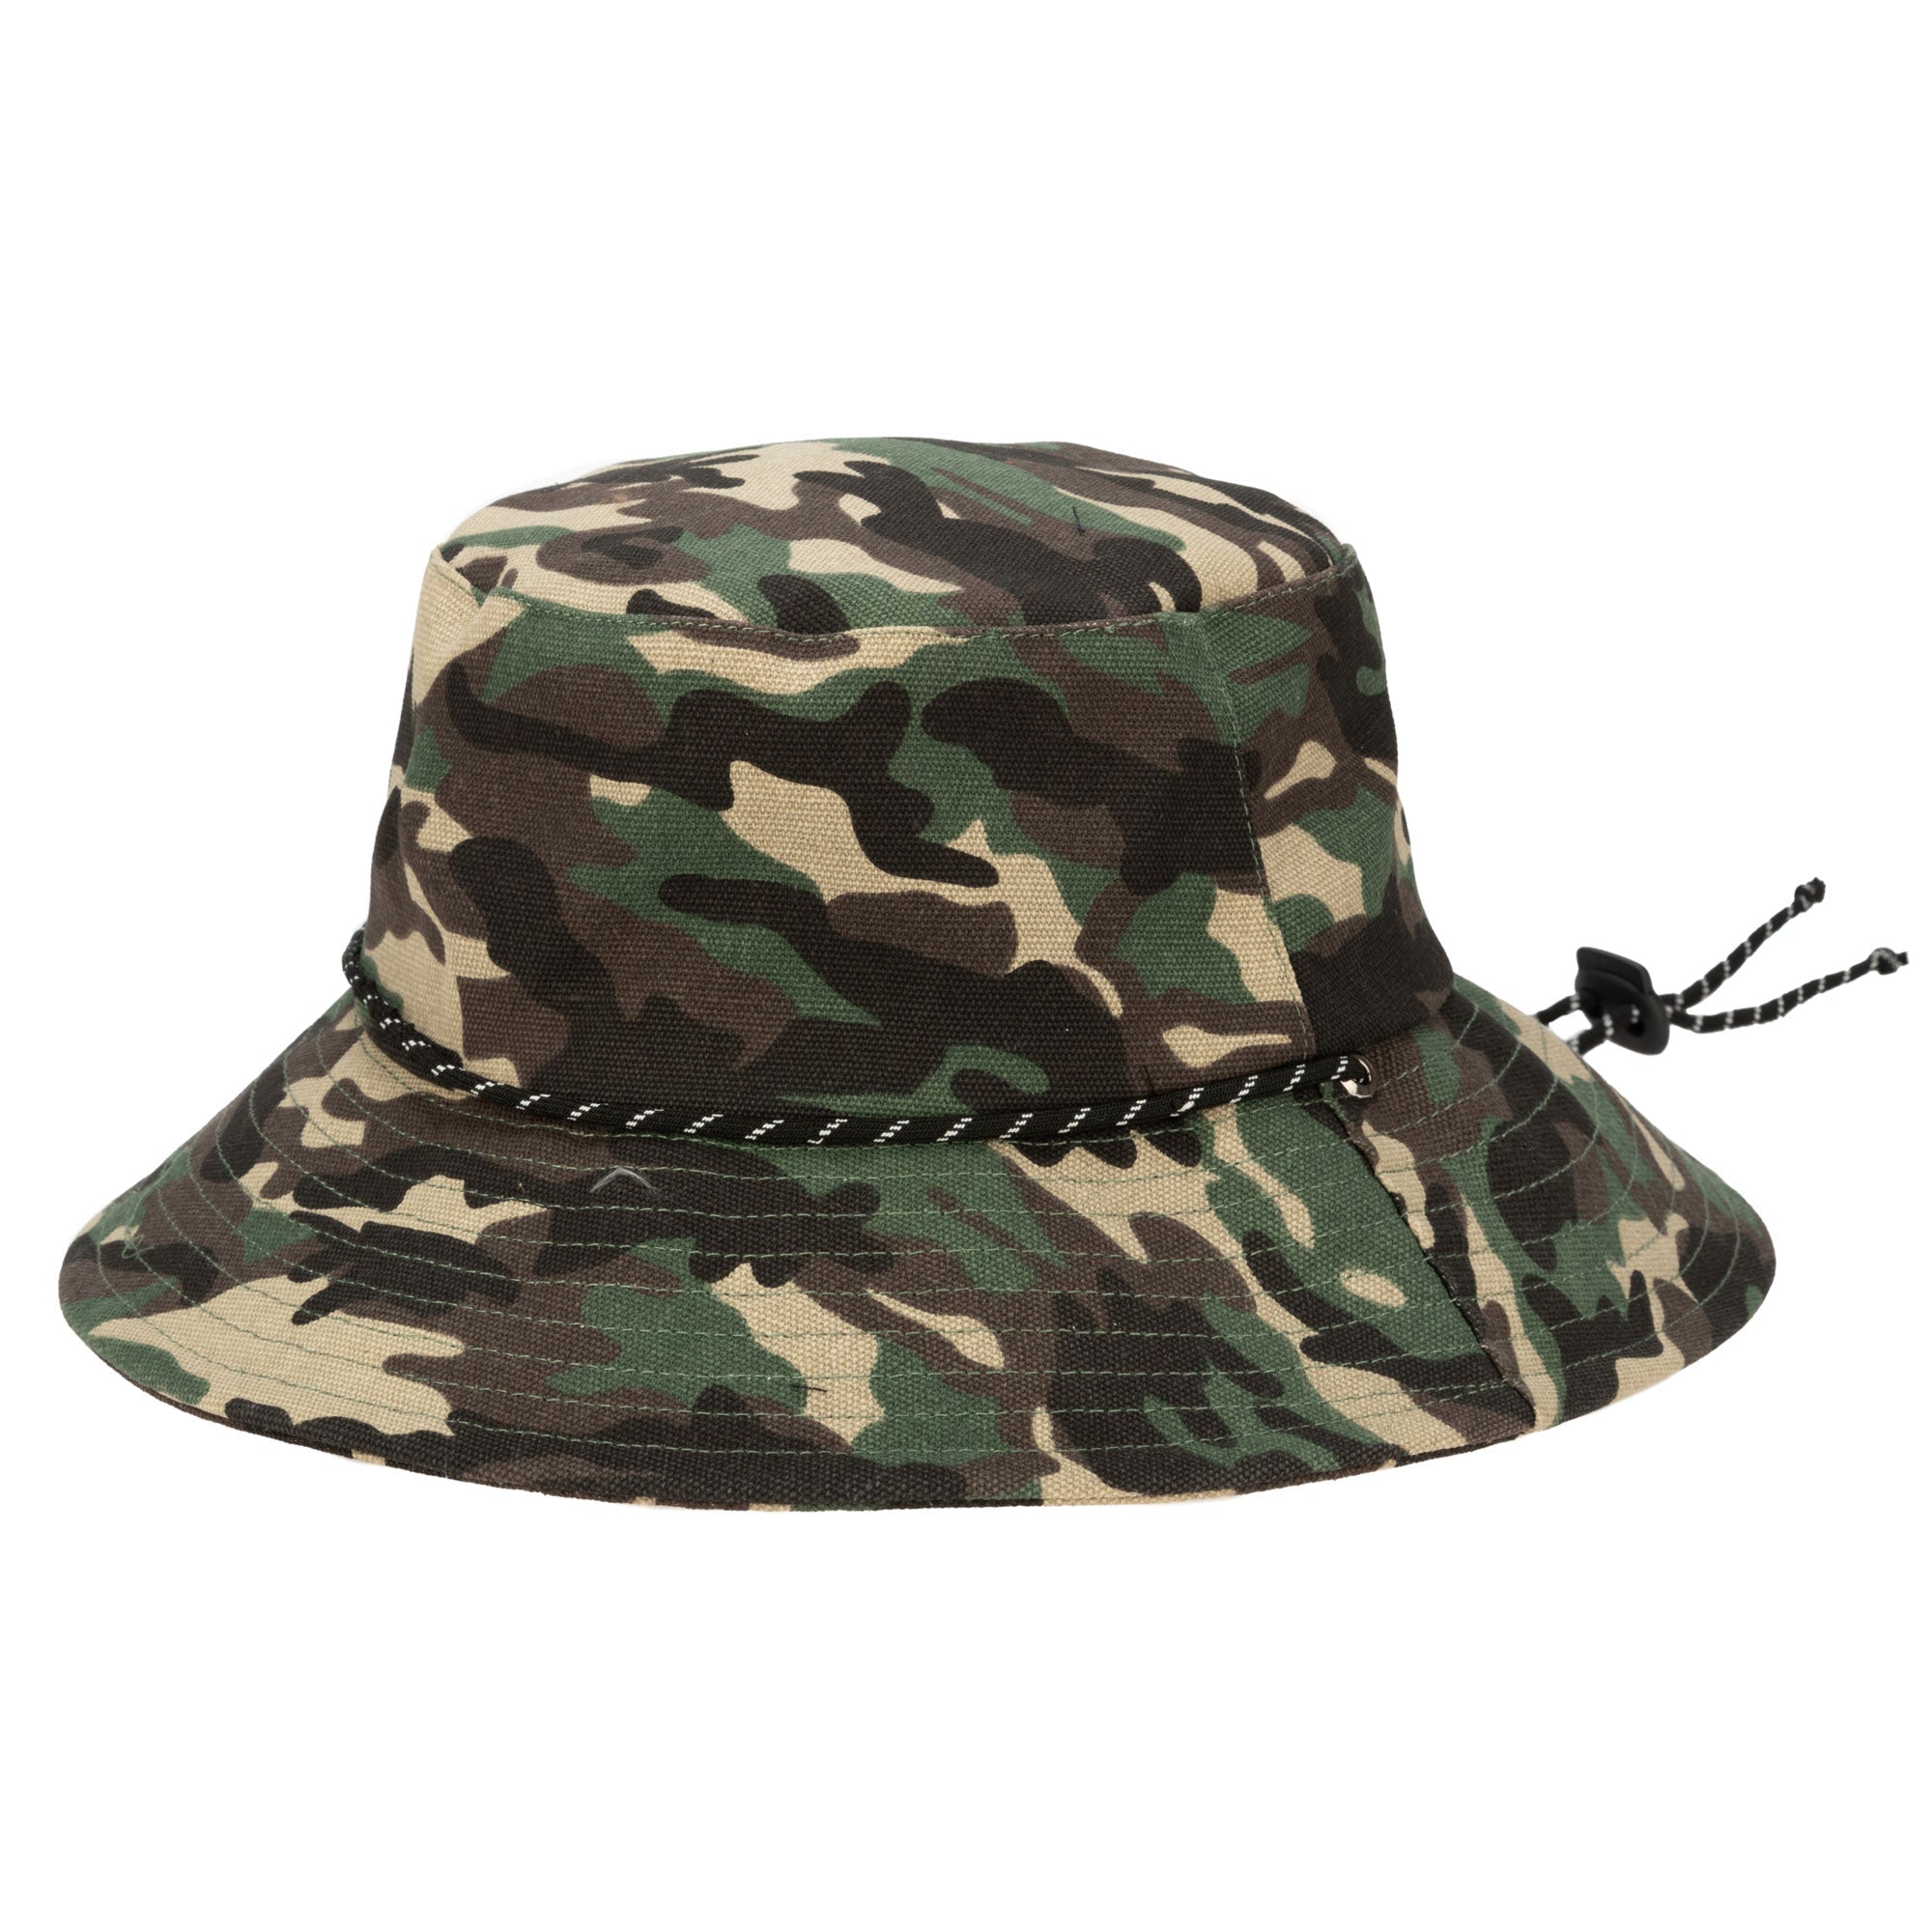 SDHC Camo Cut and Sew Sublimated Camo Print Bucket Hat